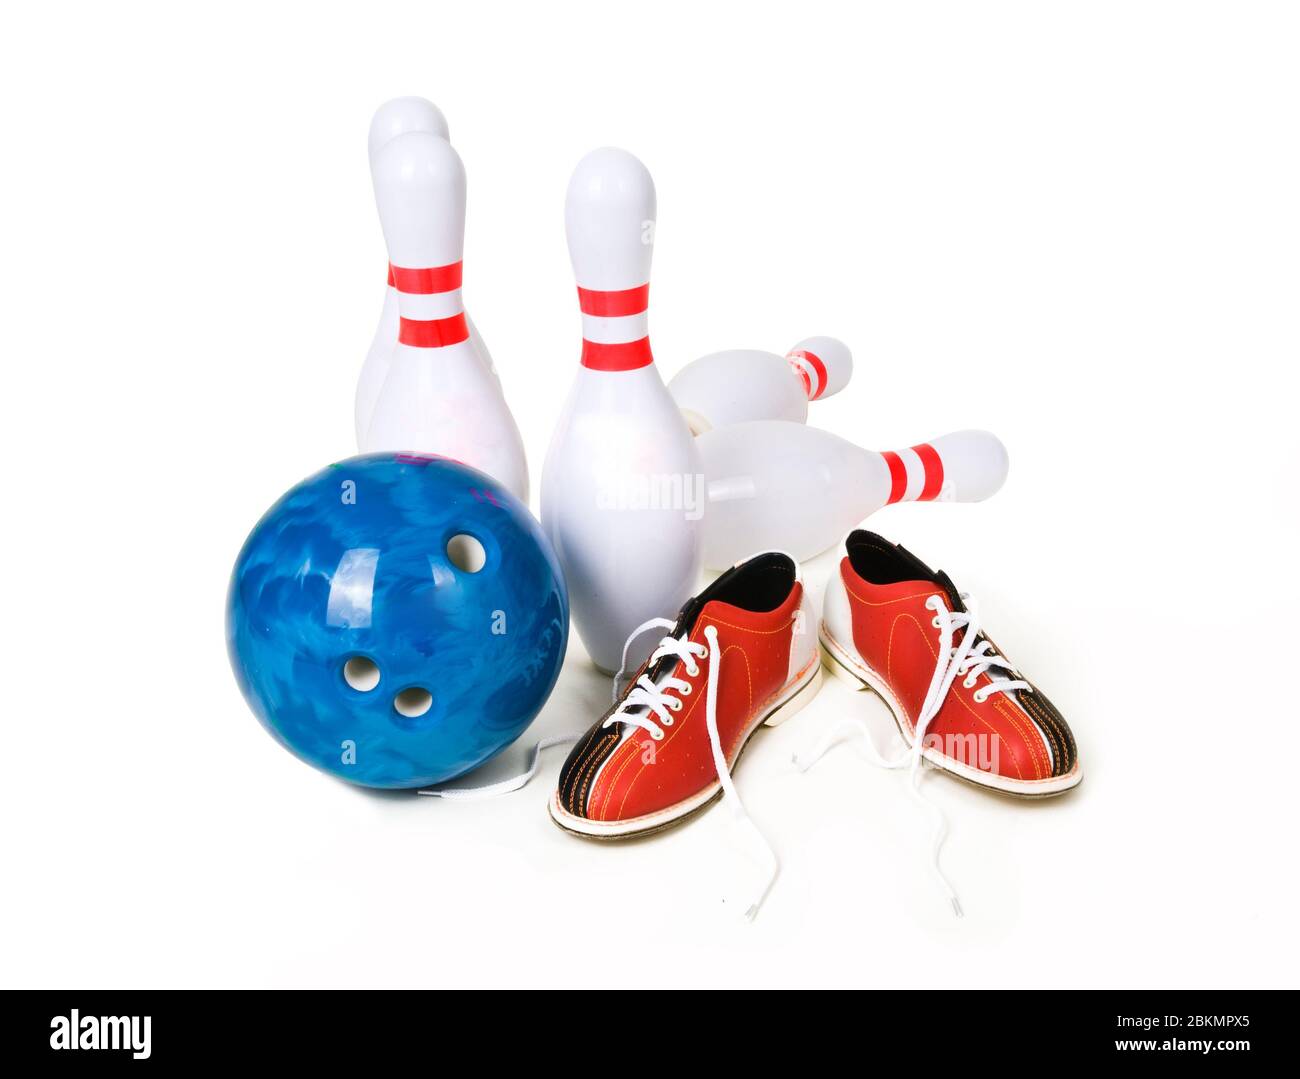 Bowling skittles, ball and shoes on a white background. Bowling game Stock Photo